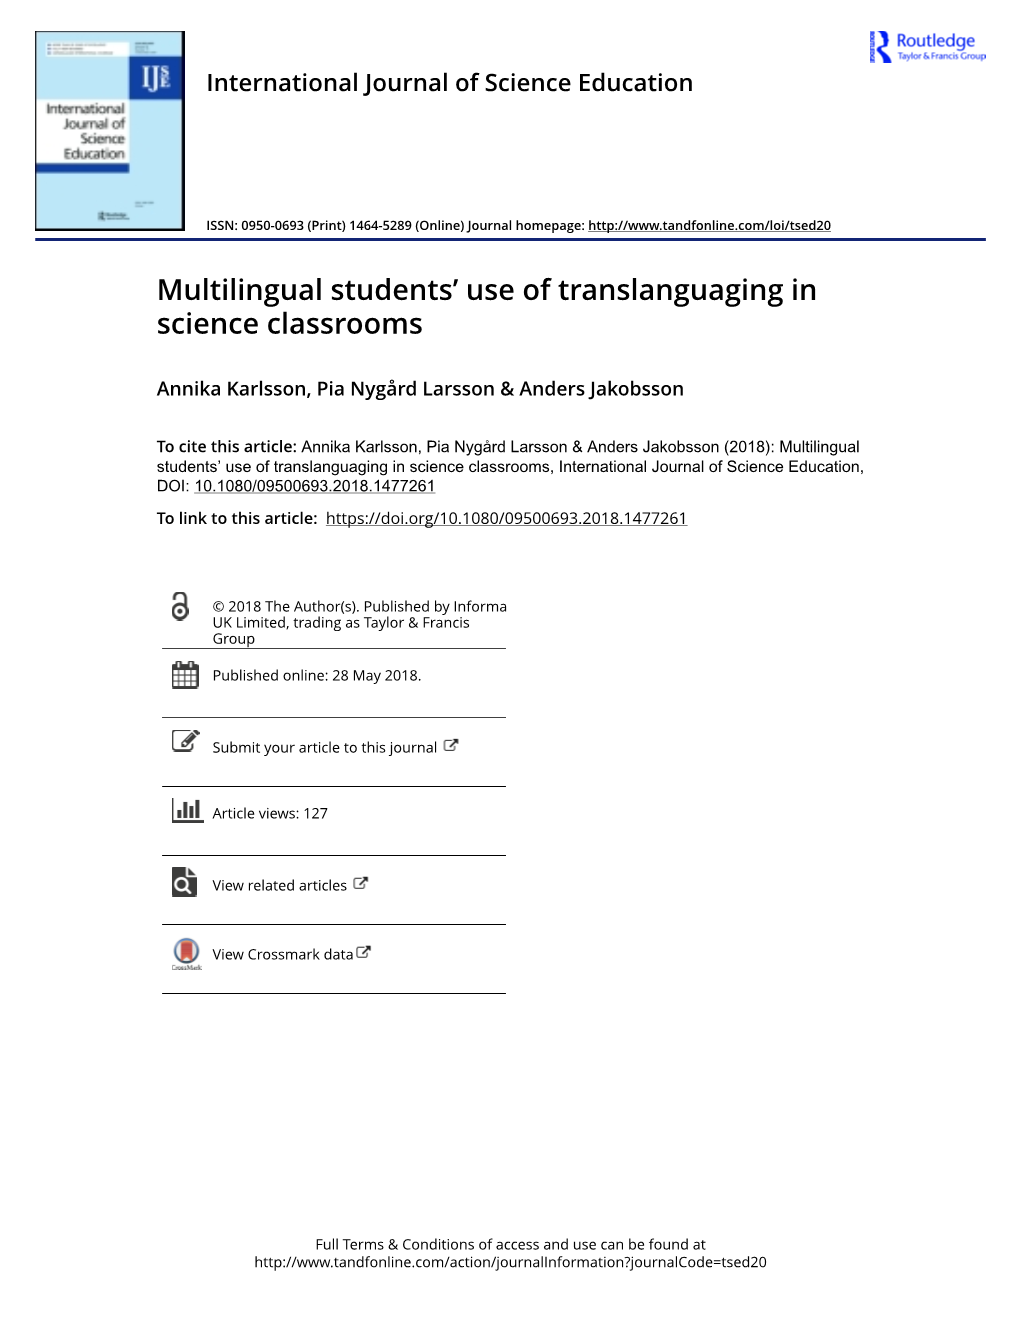 Multilingual Students' Use of Translanguaging in Science